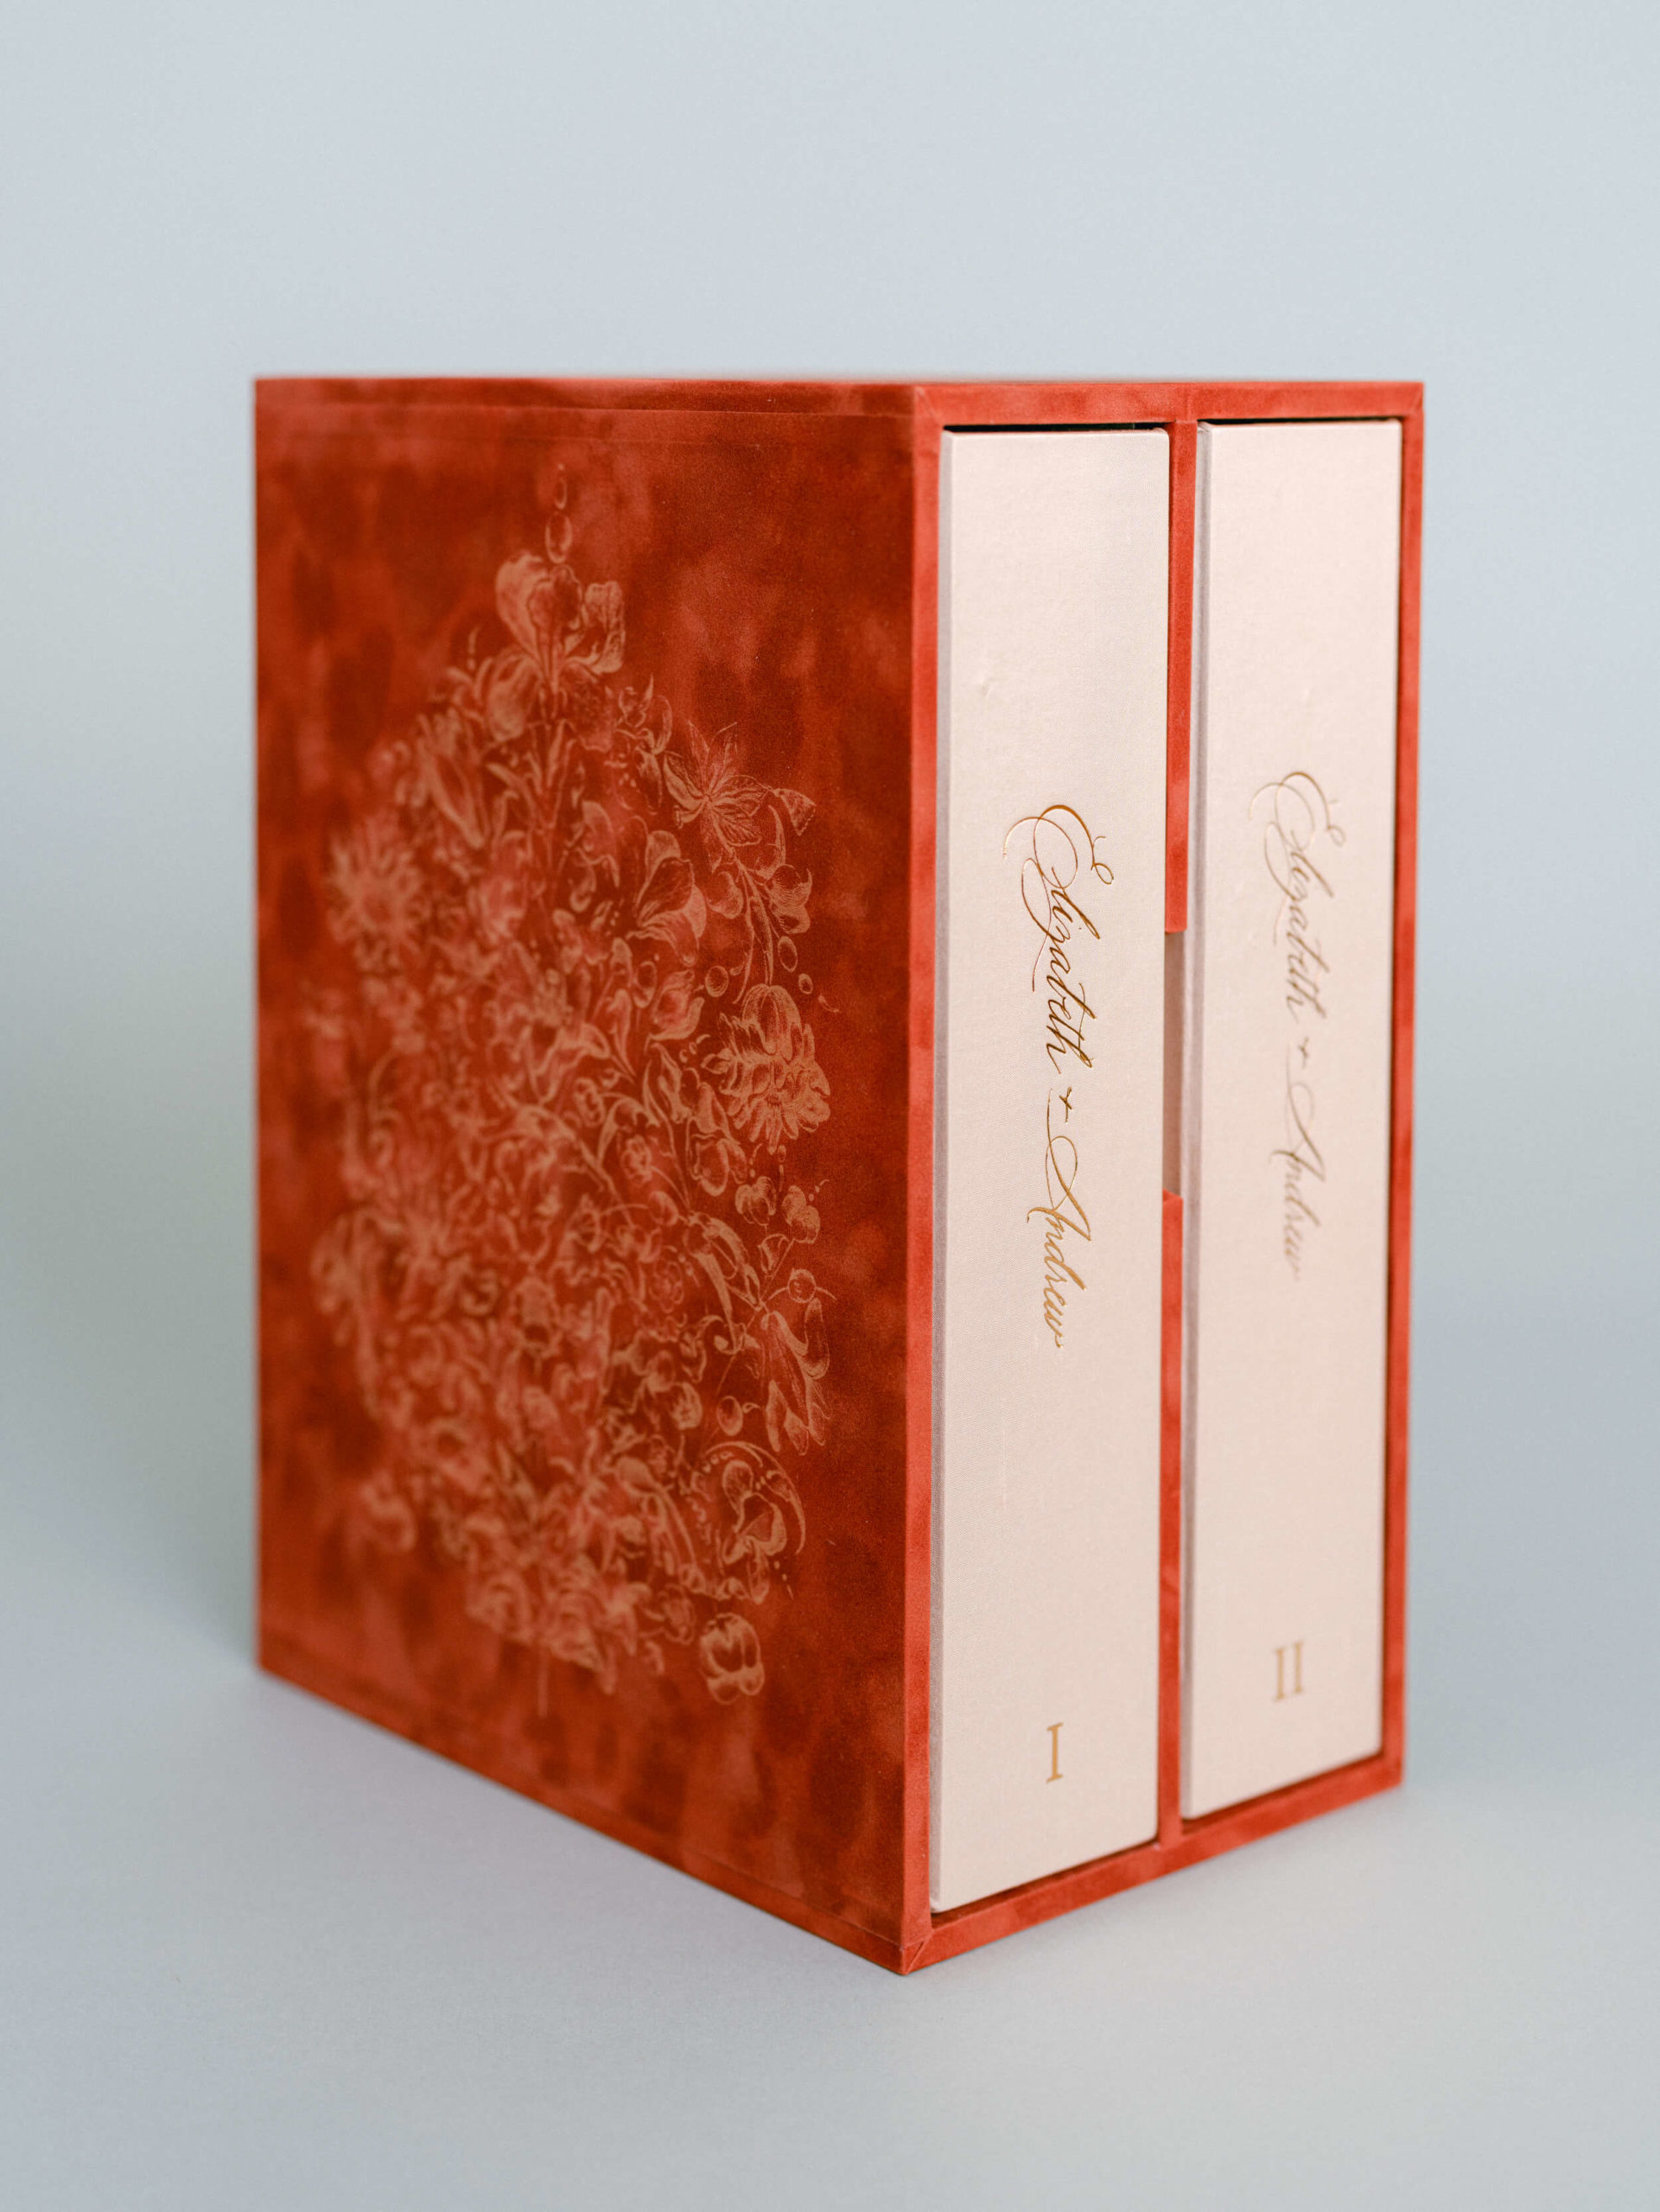 laser etching on red book cloth slipcase